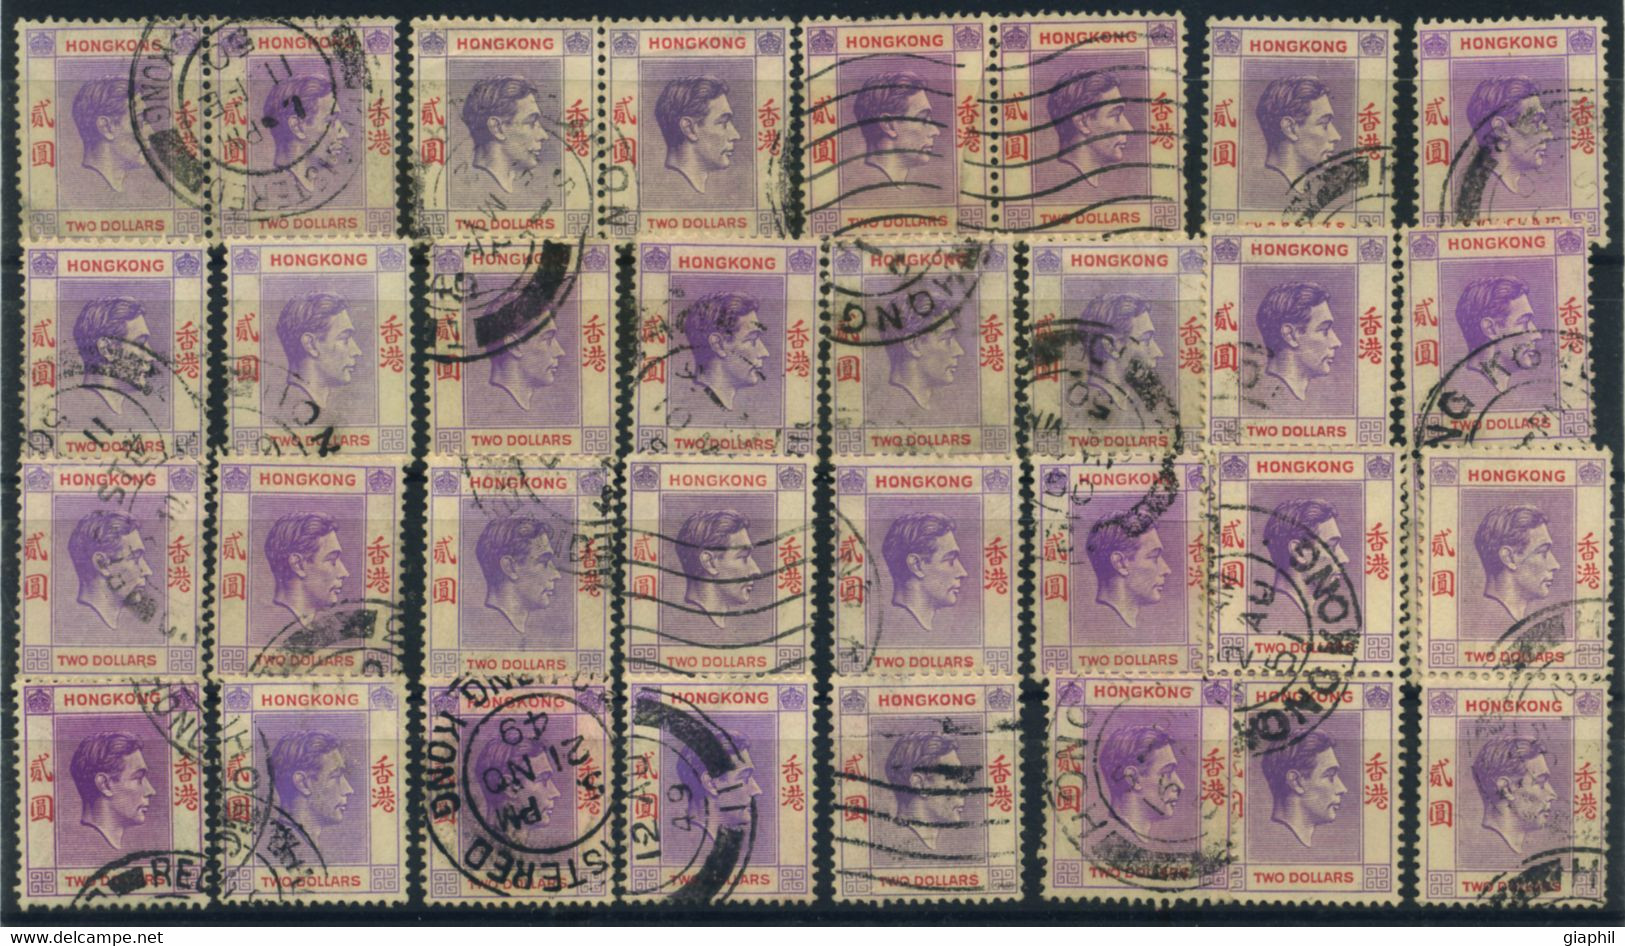 HONG KONG 1938-52 2 $ (SG 160) 32 USED EXAMPLES OFFER! - Used Stamps